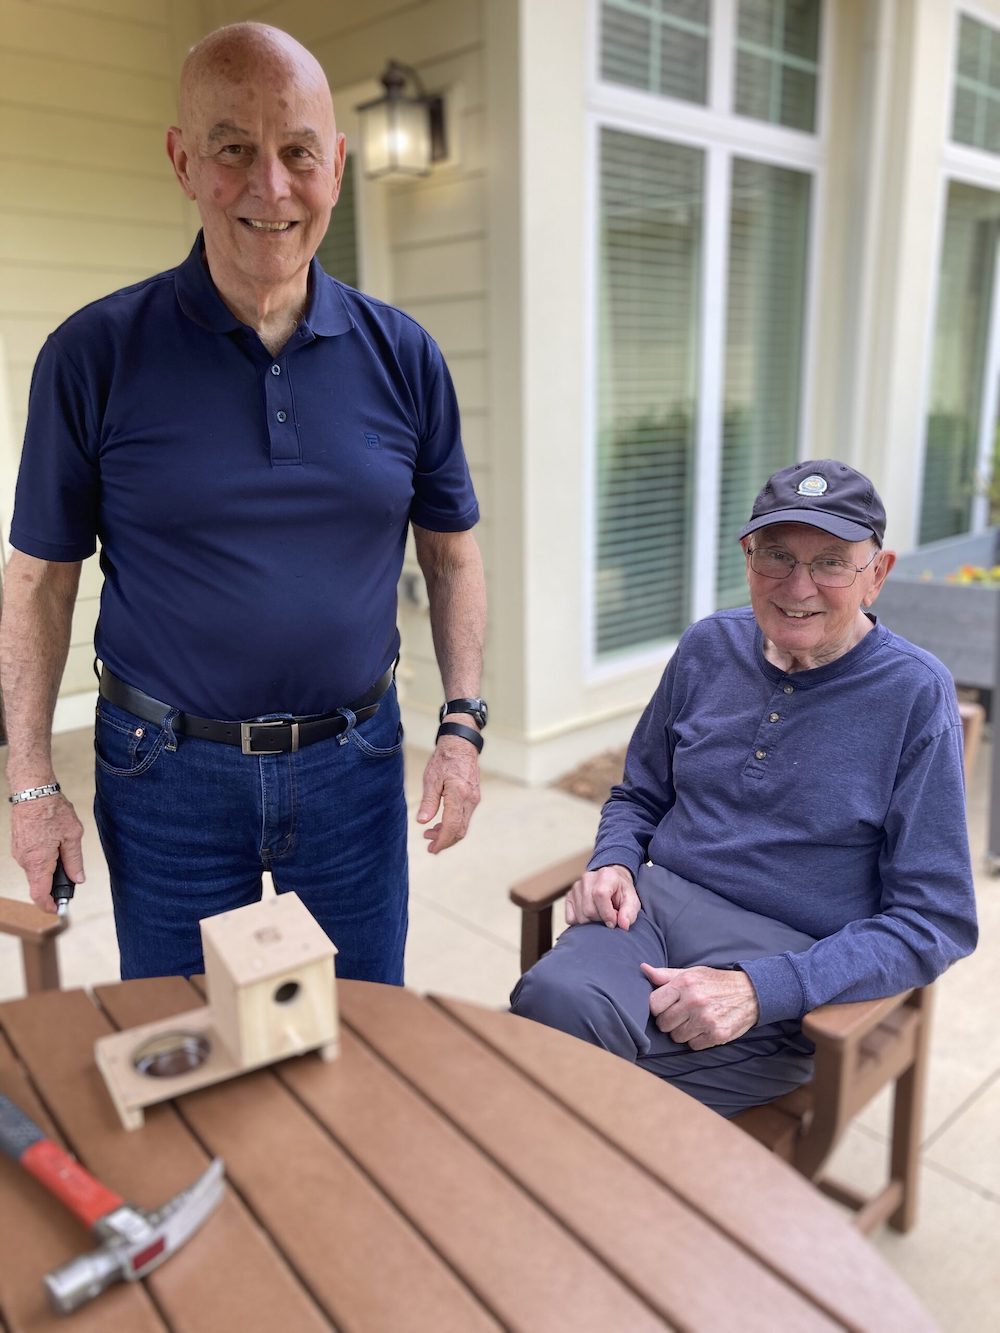 Senior Living Activities Assisted Living and Memory Care